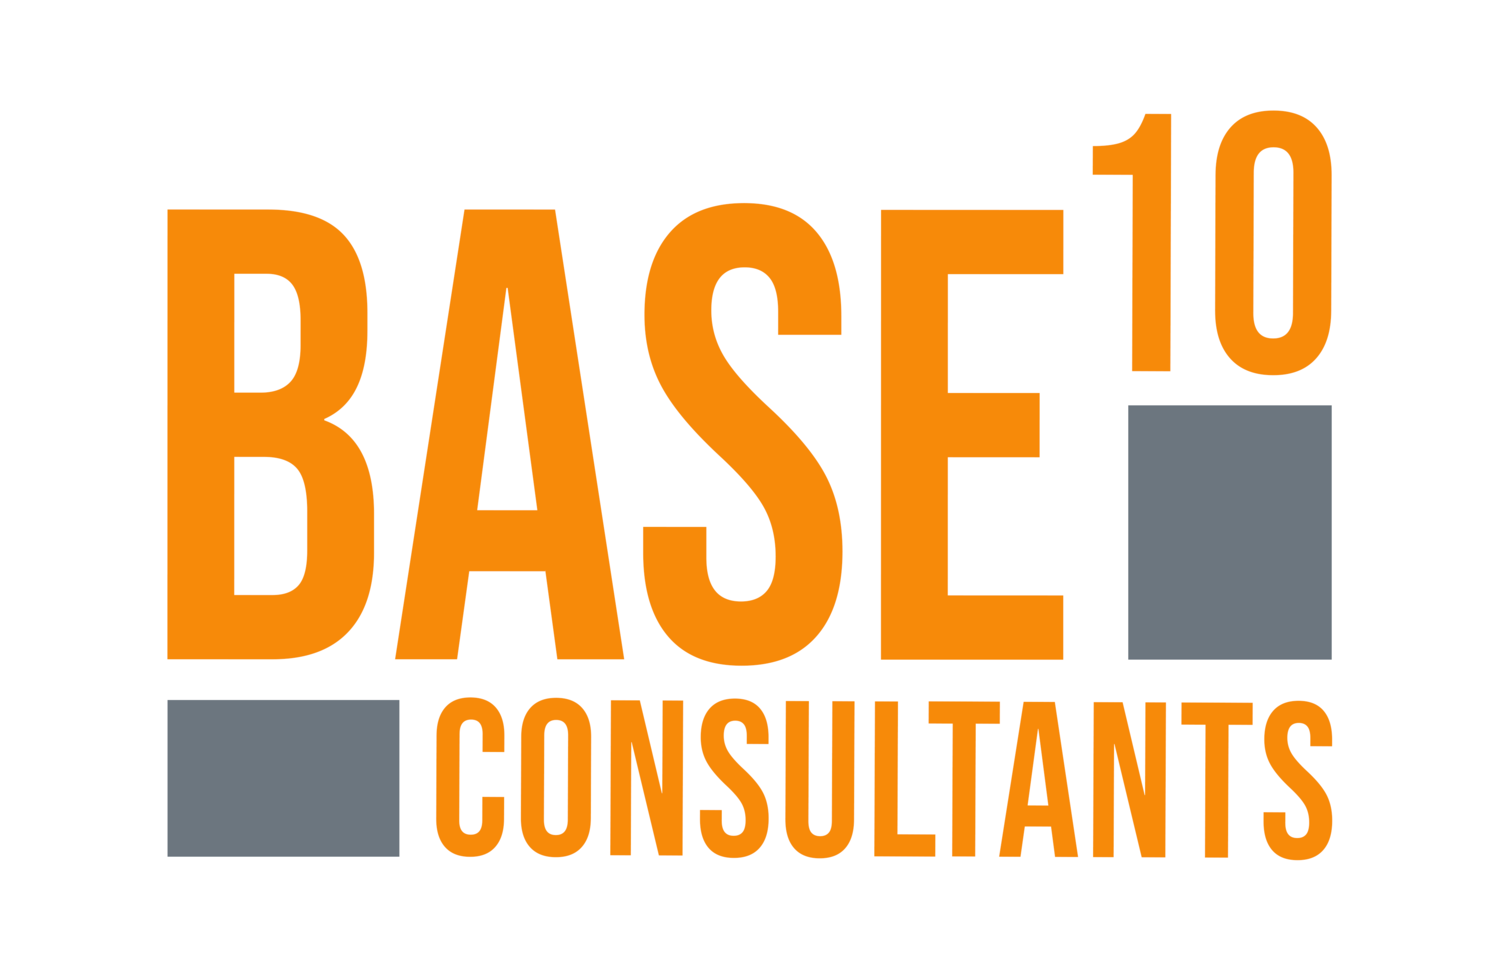 Base 10 Consultants